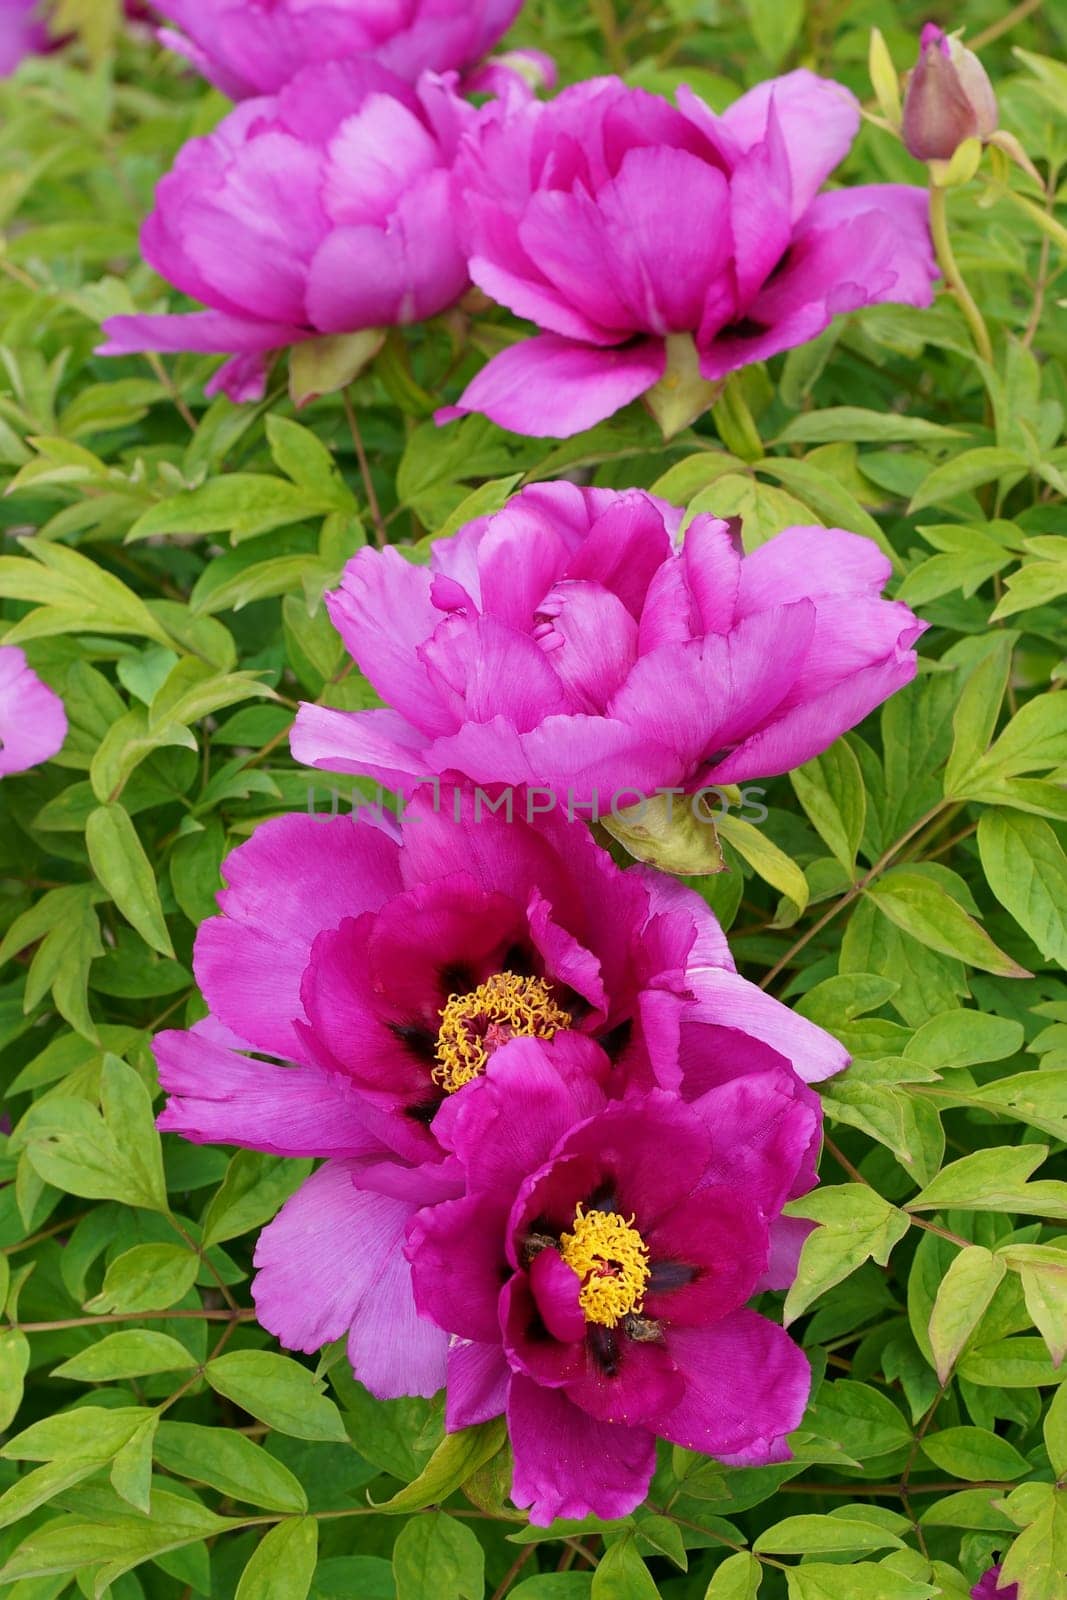 Burgundy large tree peony. Pink Flower of Tree Peony Blooming in the garden. Beautiful Petals of Paeonia sect. by aprilphoto